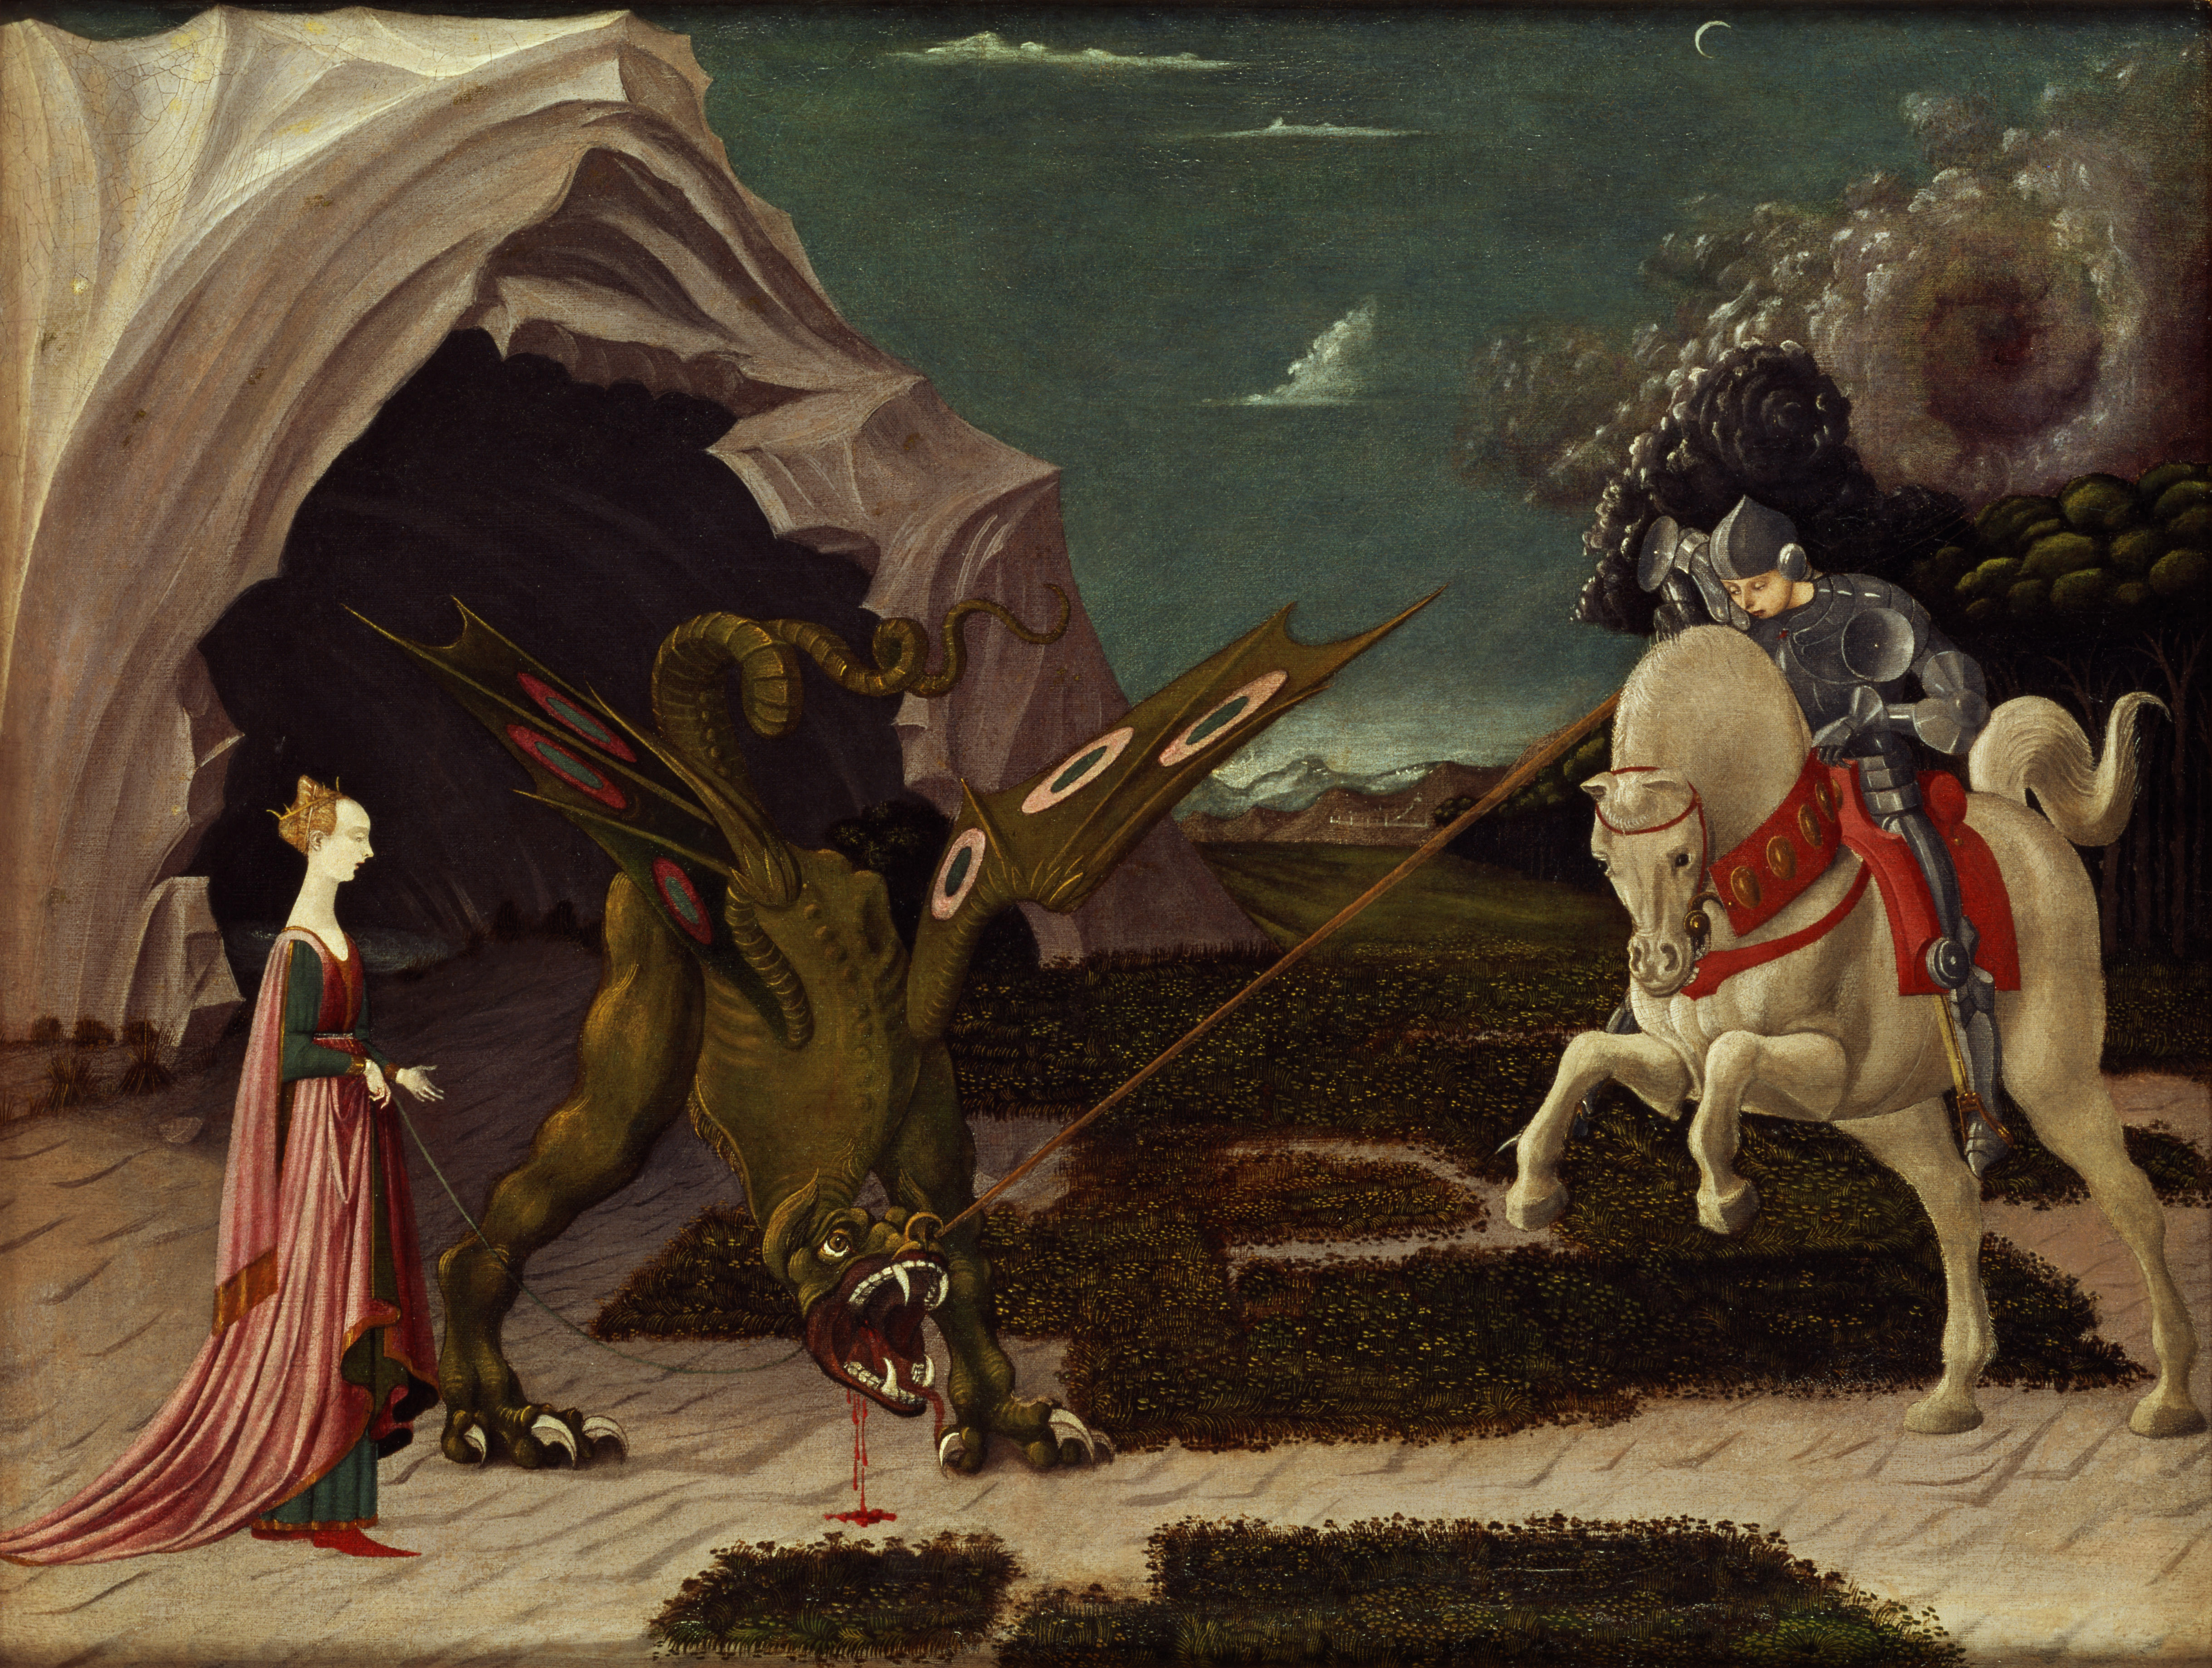 St. George and the Dragon/ Paolo Uccello